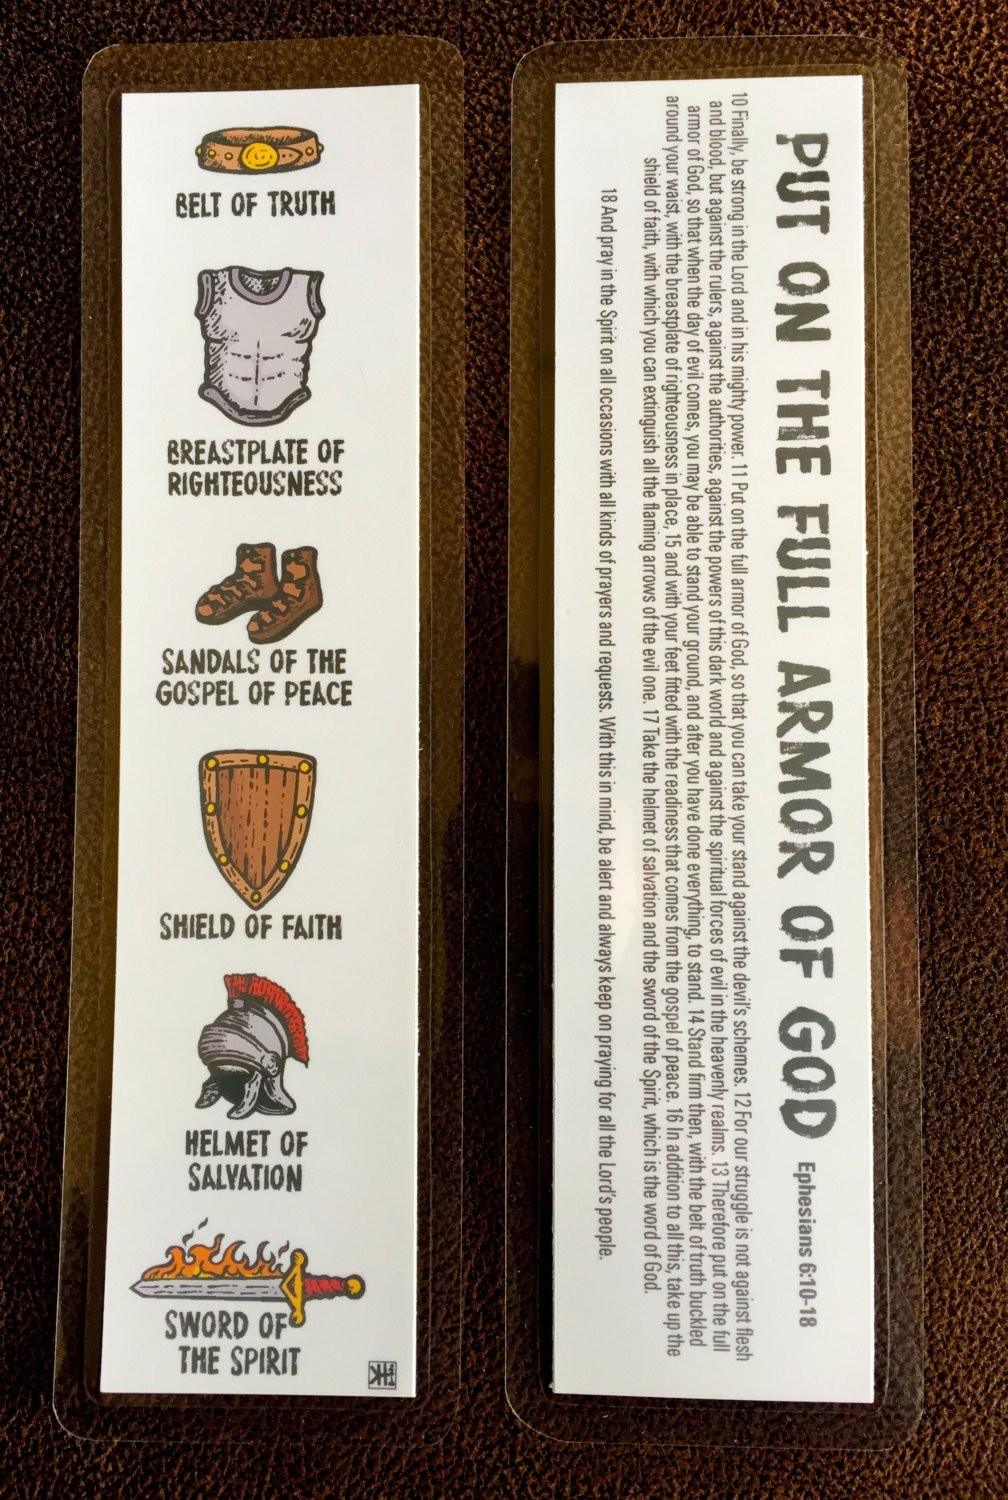 Australian Papercraft Essentials Armor Of God Ready to Print Bookmarks